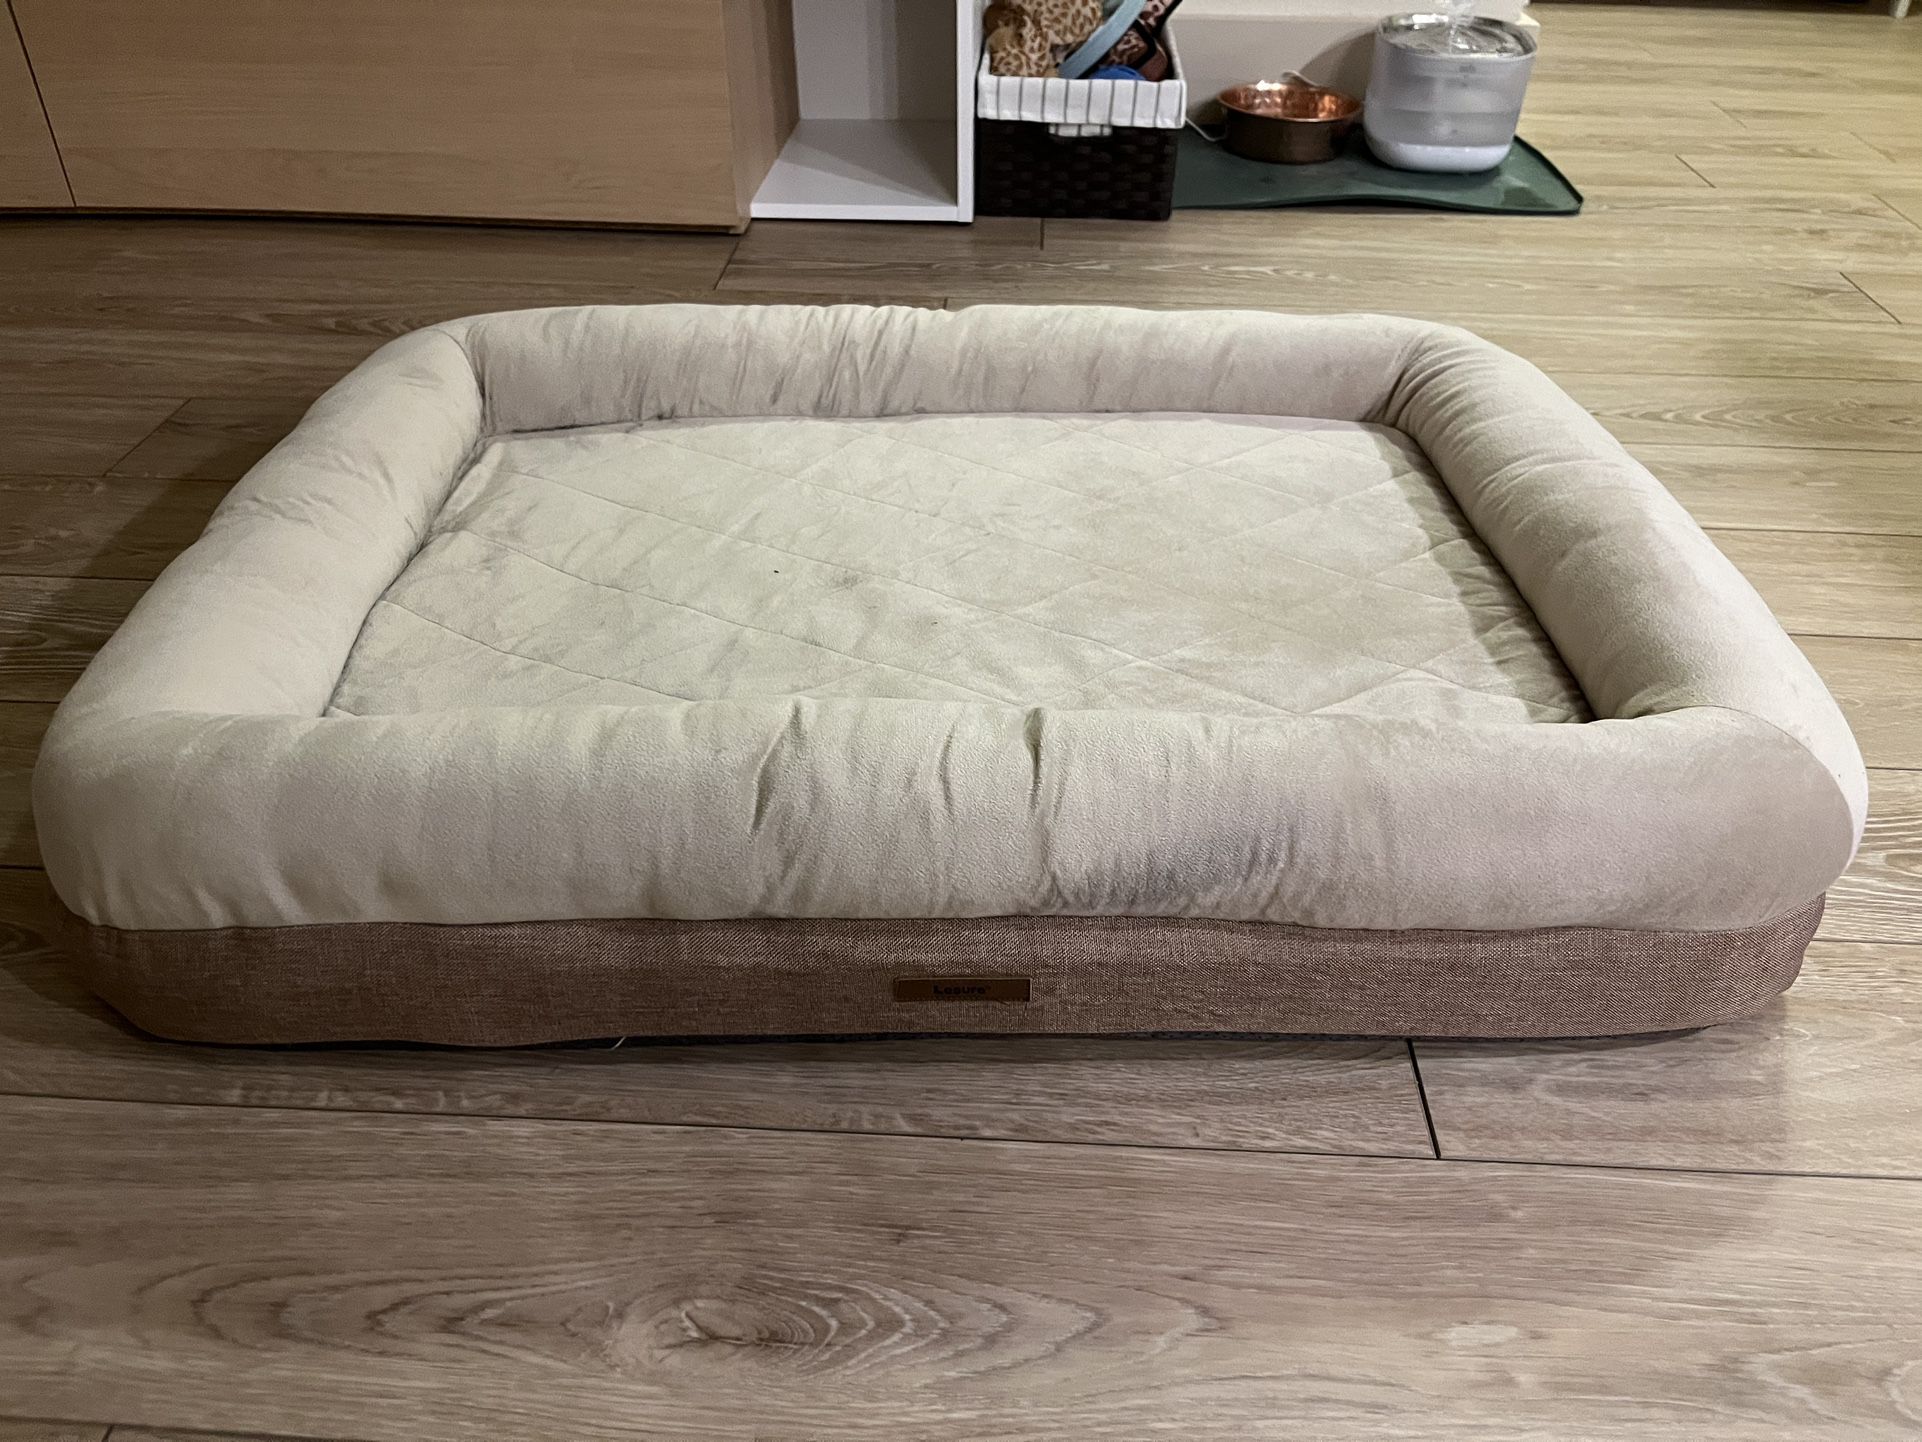 New Orthopedic Dog Bed With Bolster And Memory Foami